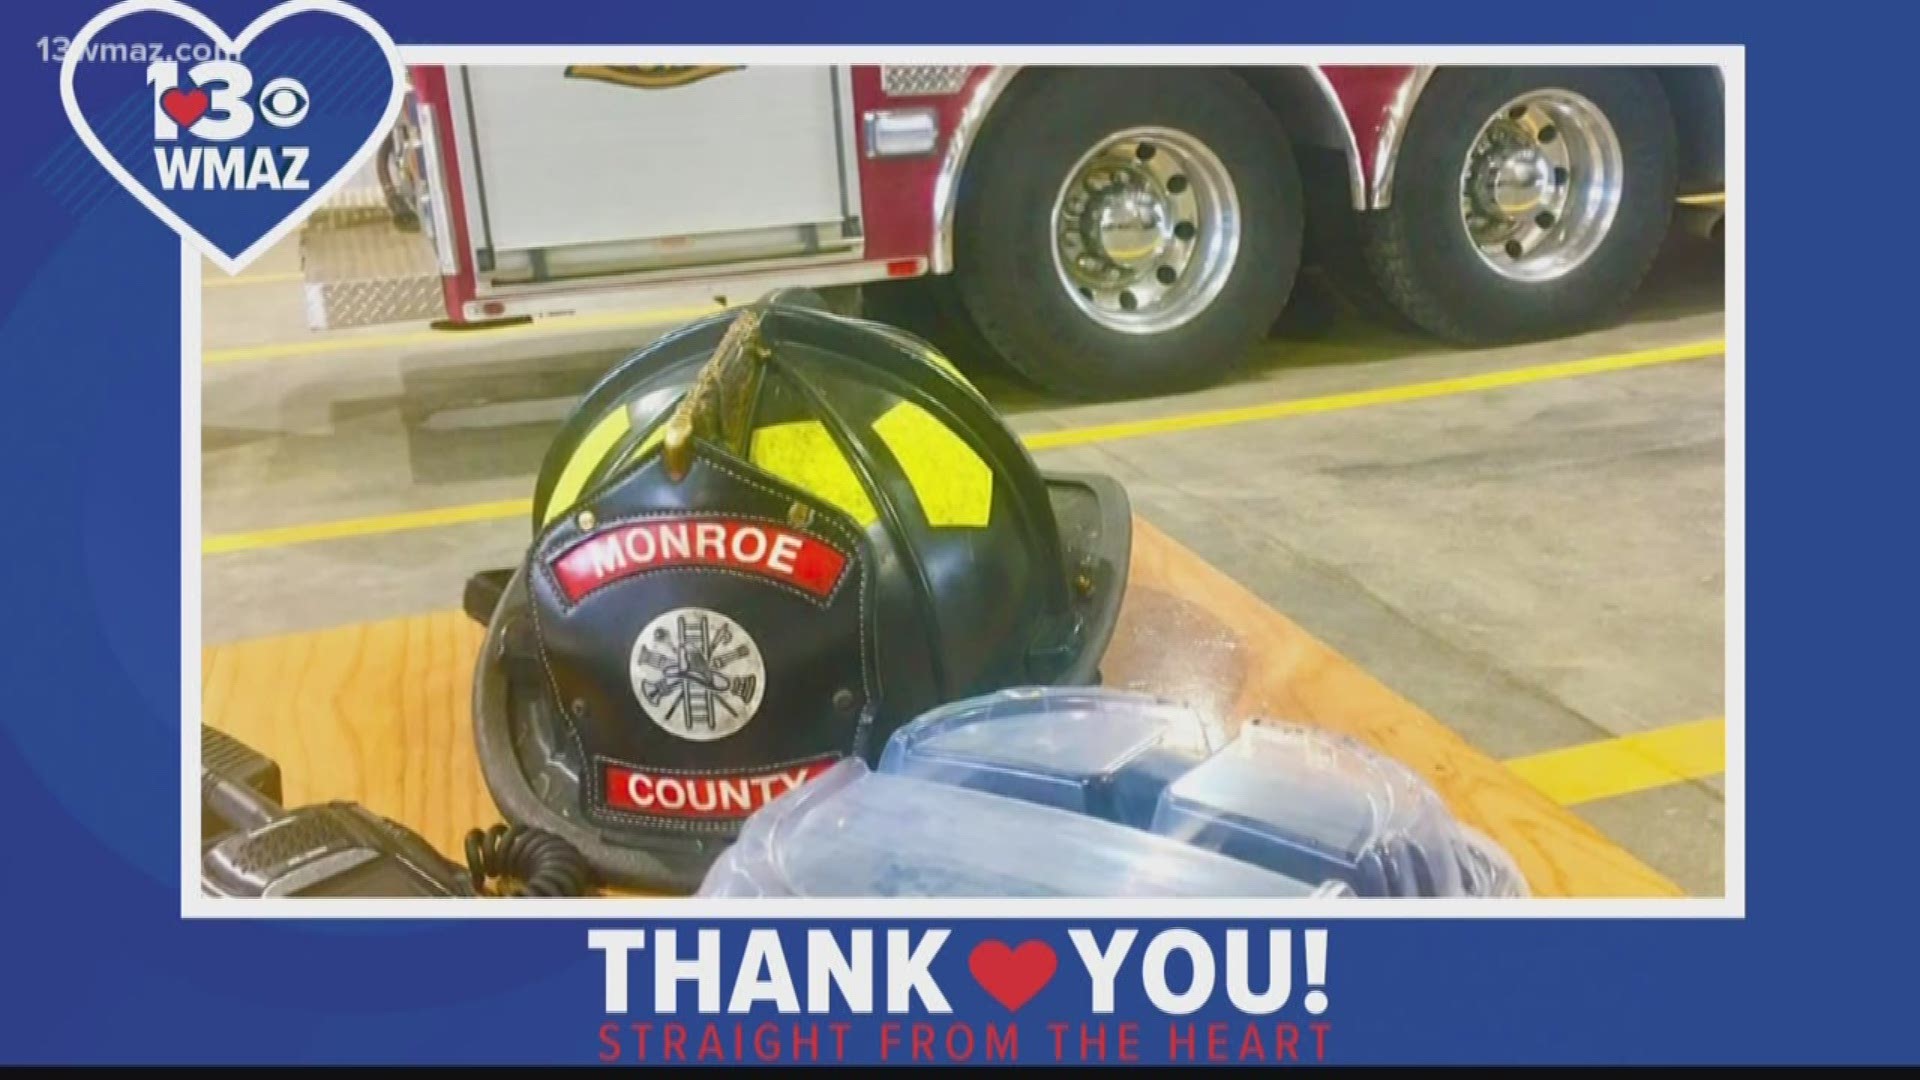 13WMAZ wants to honor everyone on the front lines doing their part to keep Central Georgia going.